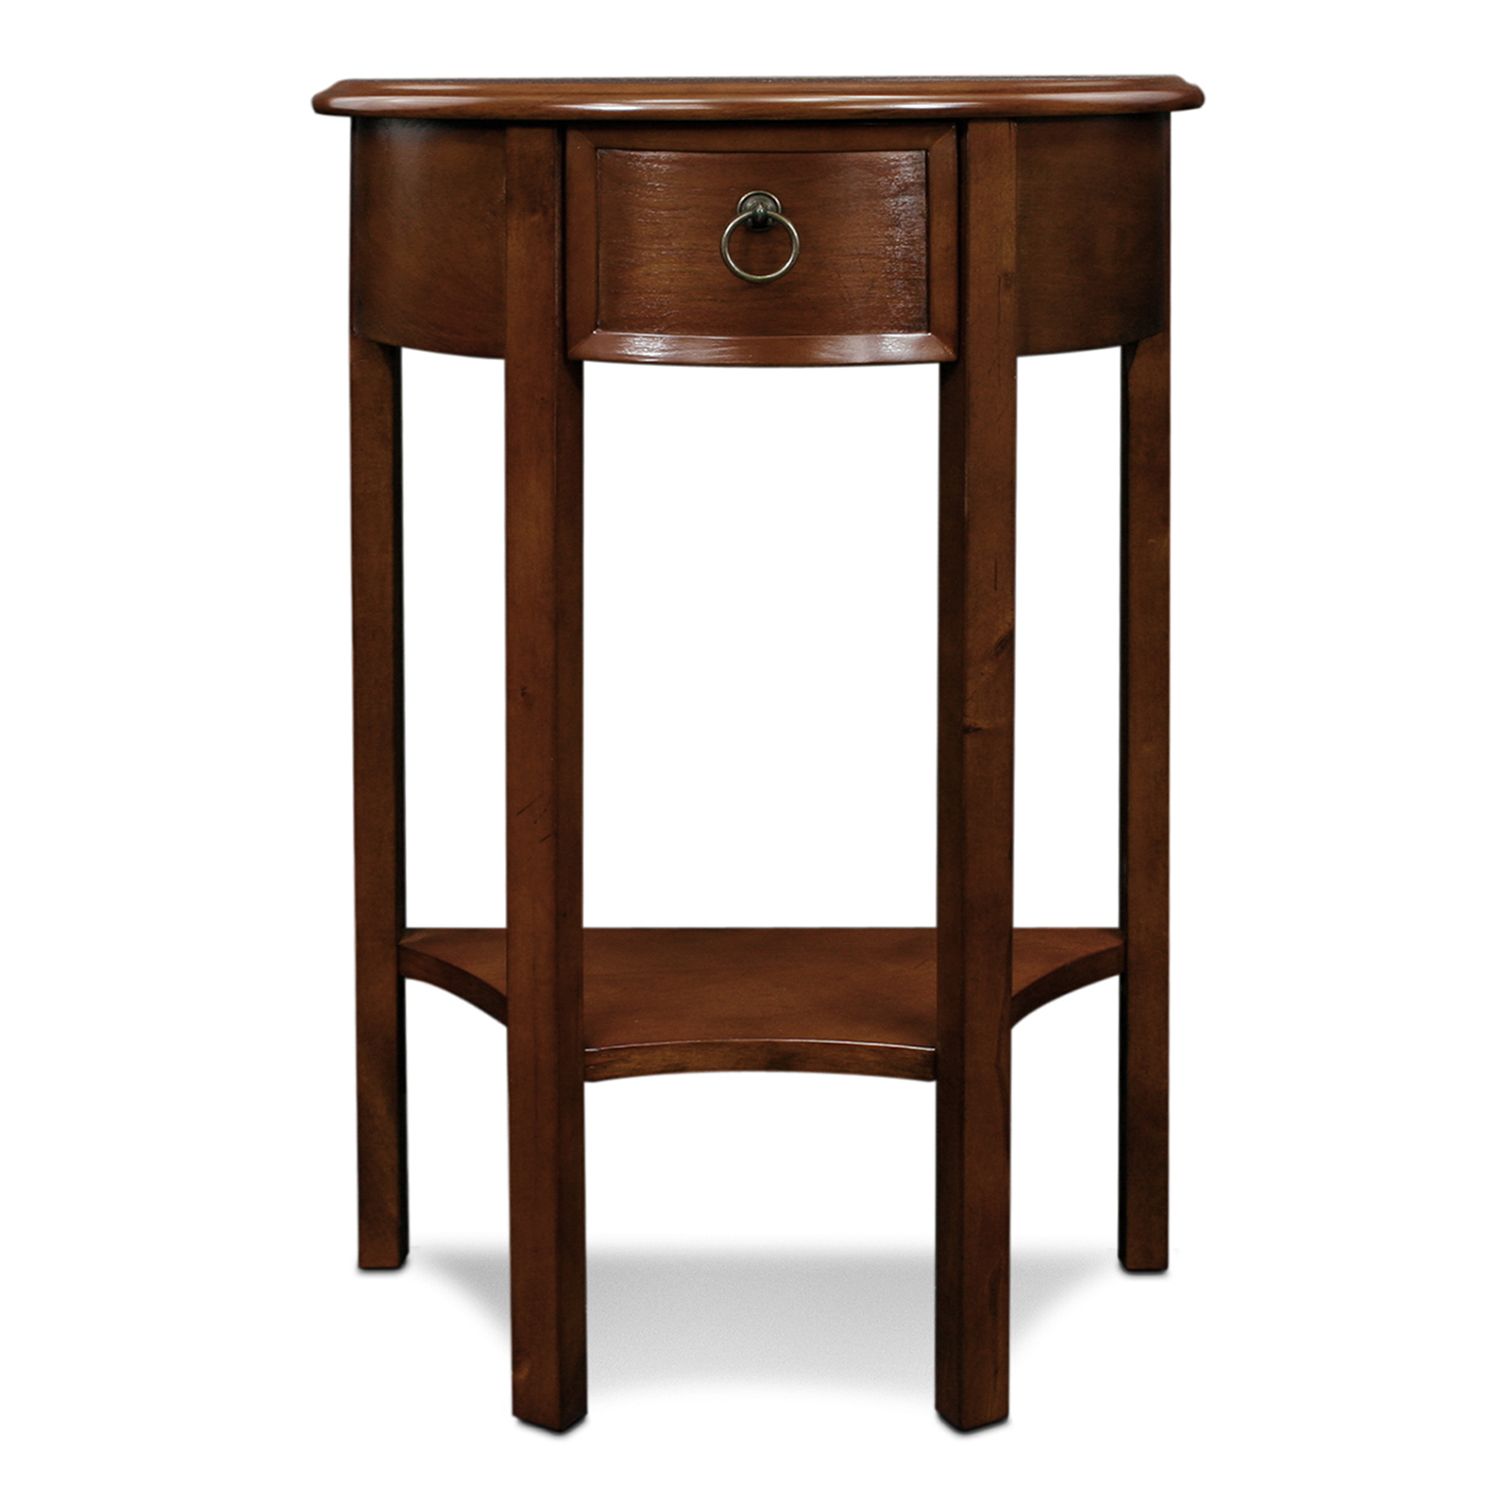 Image for Leick Furniture Demilune Entryway End Table at Kohl's.